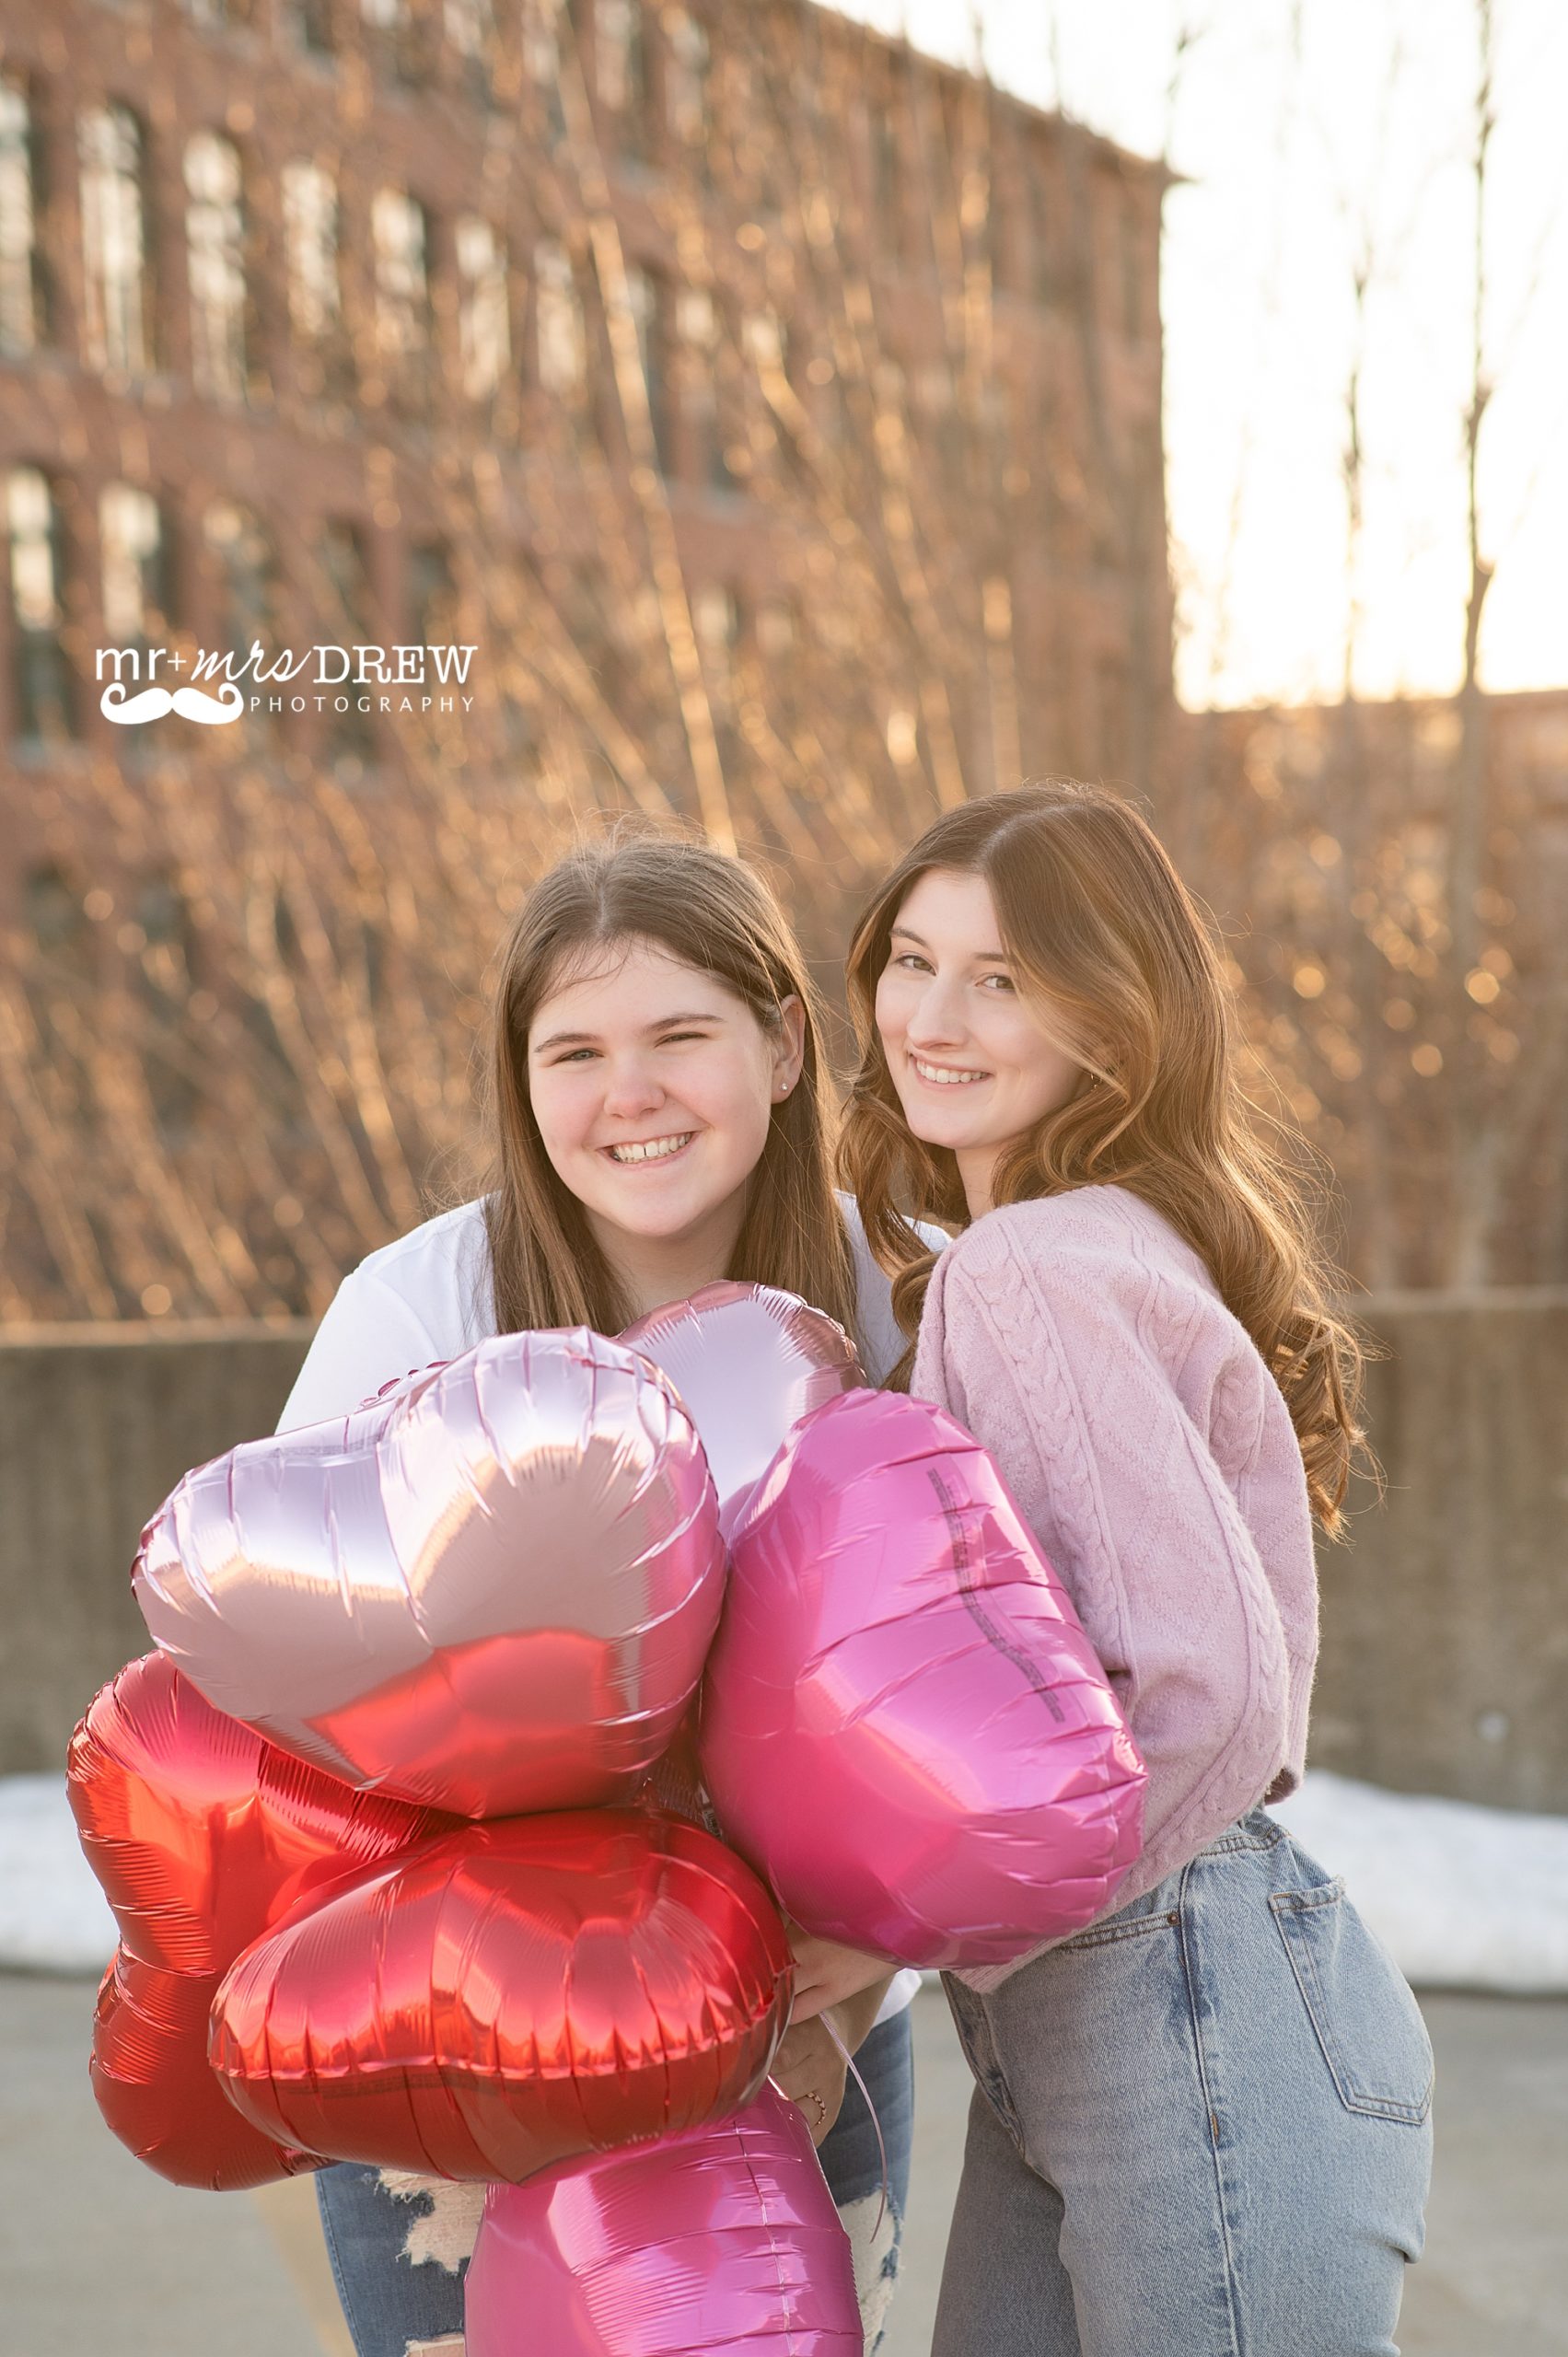 balloons as an accessory for senior photos in Lowell MA